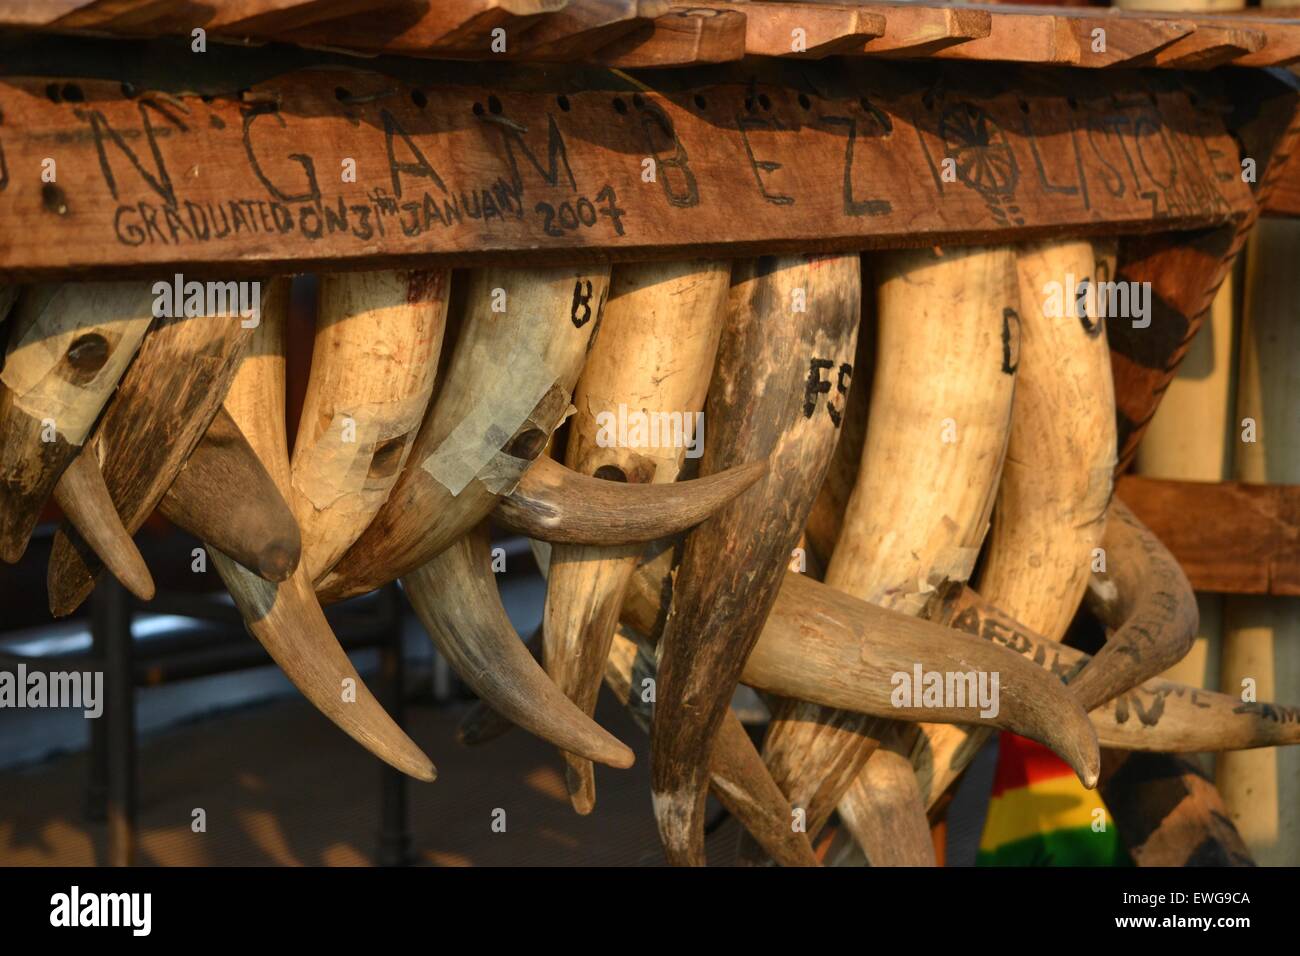 N Gambezi horn musical xylophone. On the Zambezi river this was the instrument of the wonderful musicians playing on board. Stock Photo